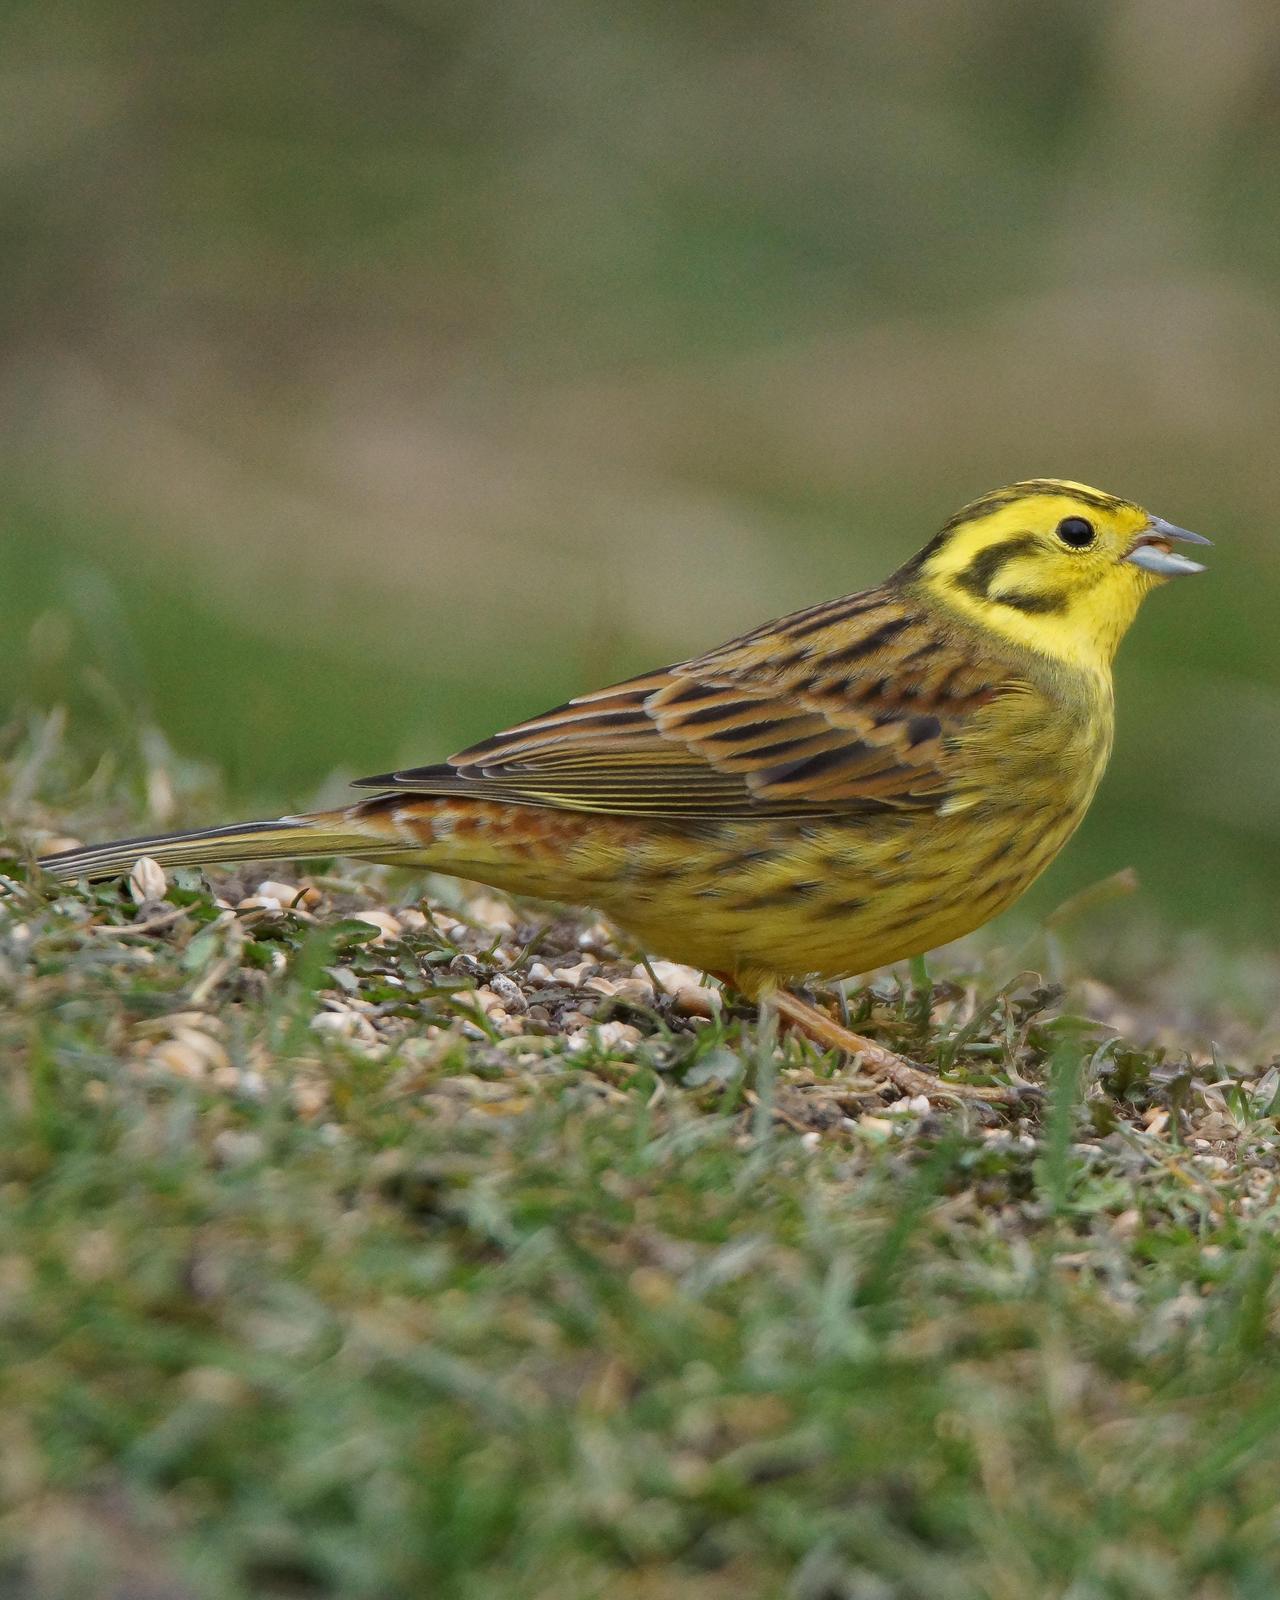 Yellowhammer Photo by Steve Percival